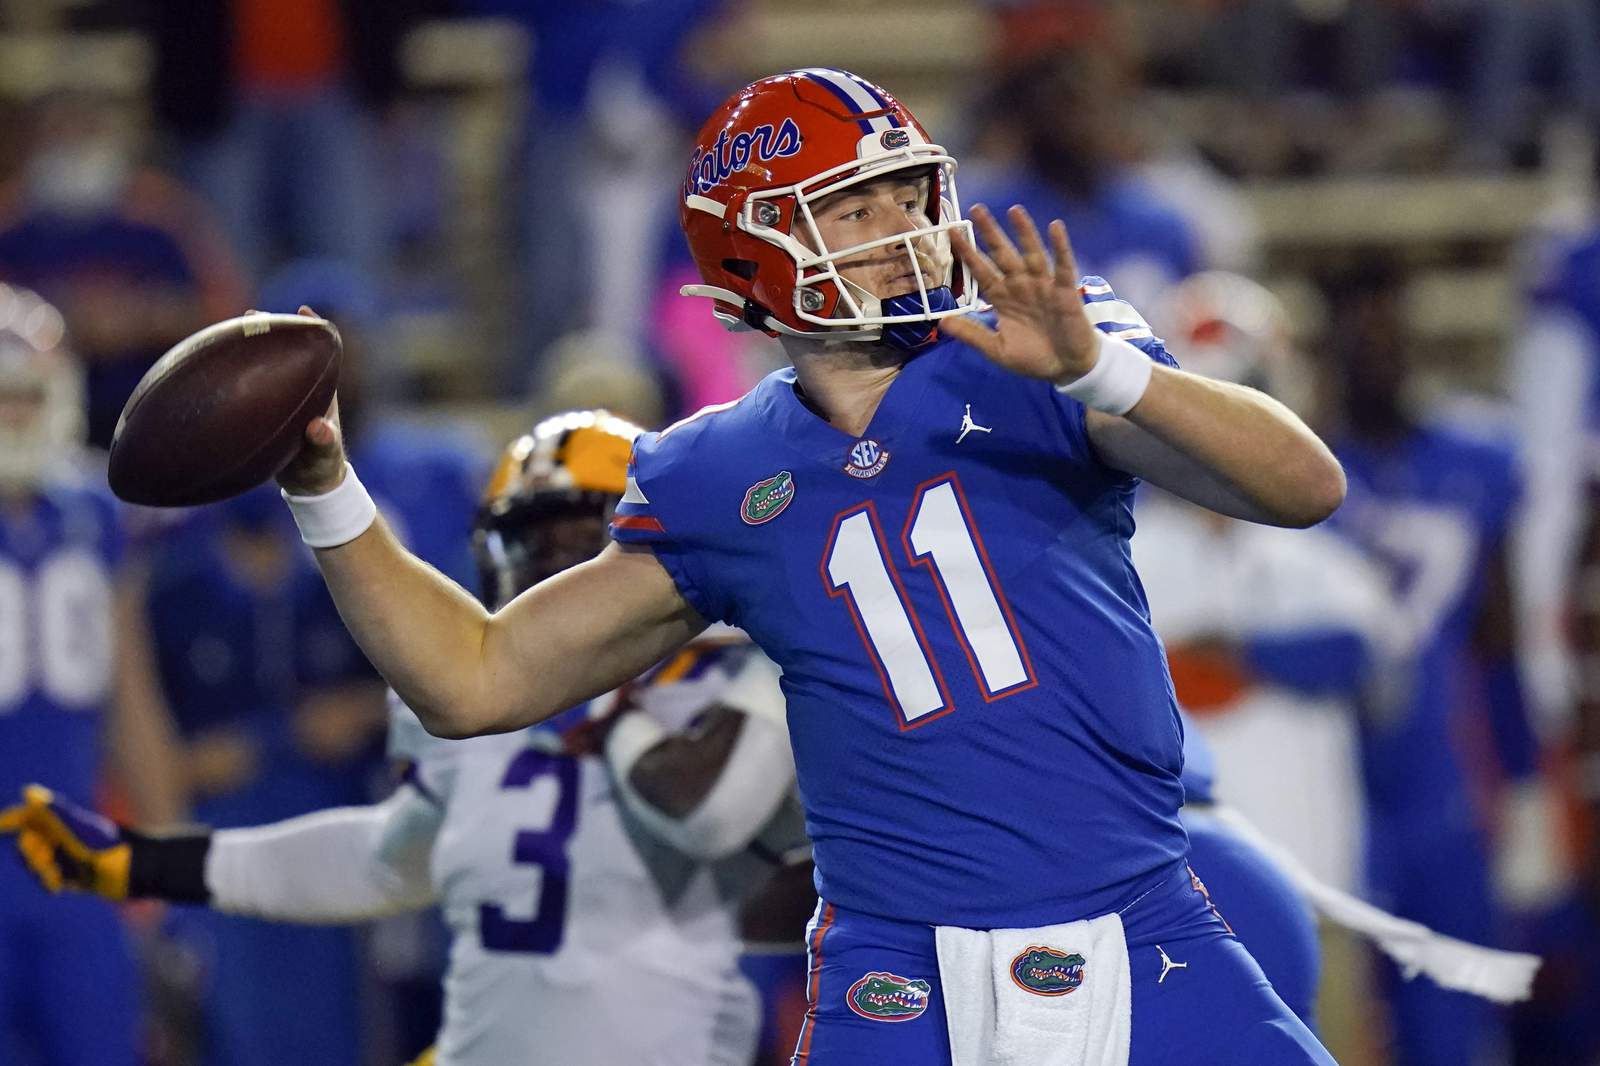 Florida-Oklahoma in Cotton Bowl dozen years after title game